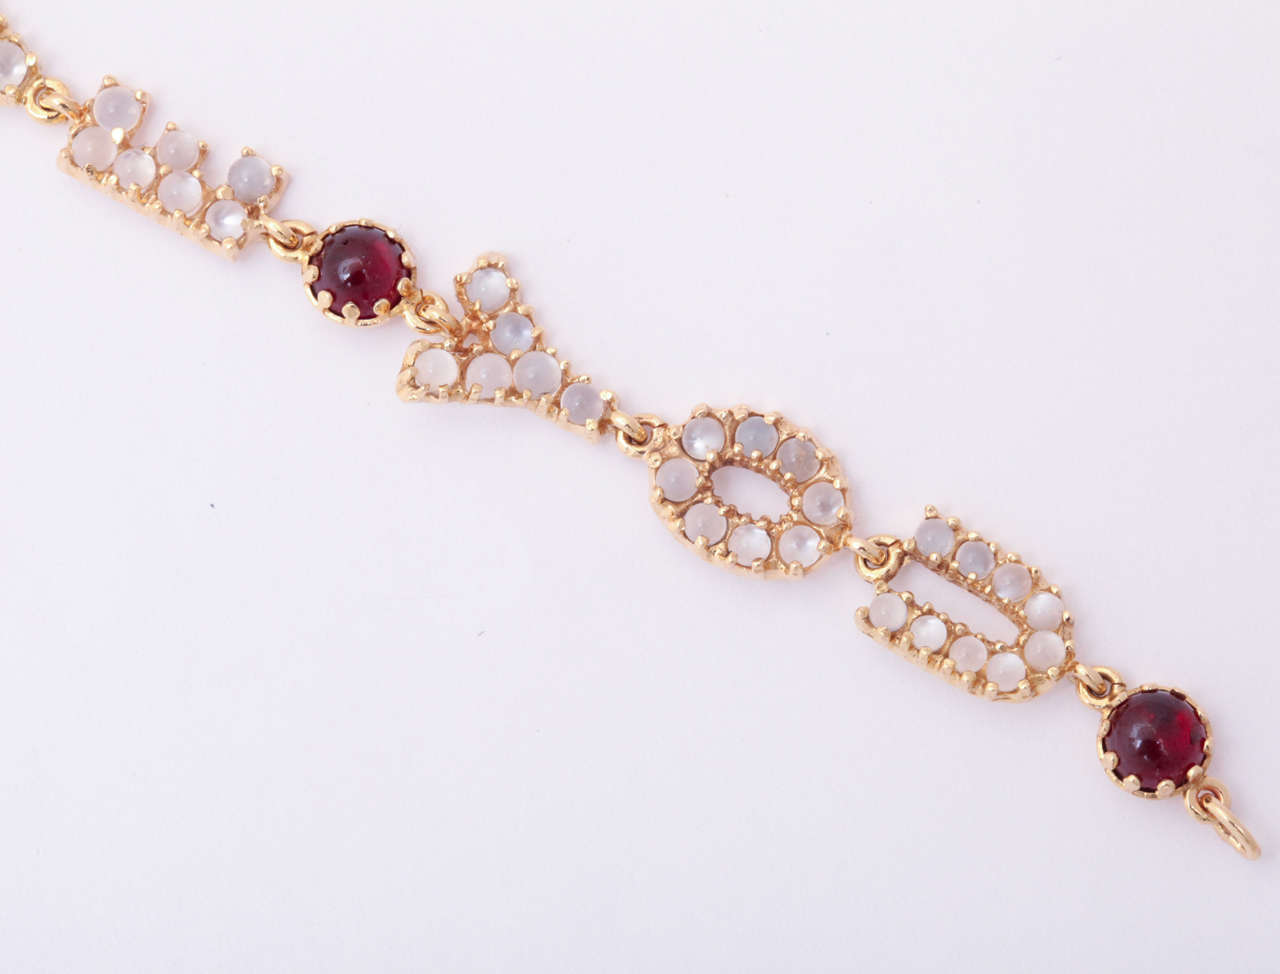 Women's Love Bracelet in Ruby and Moonstone by Lucien Piccard